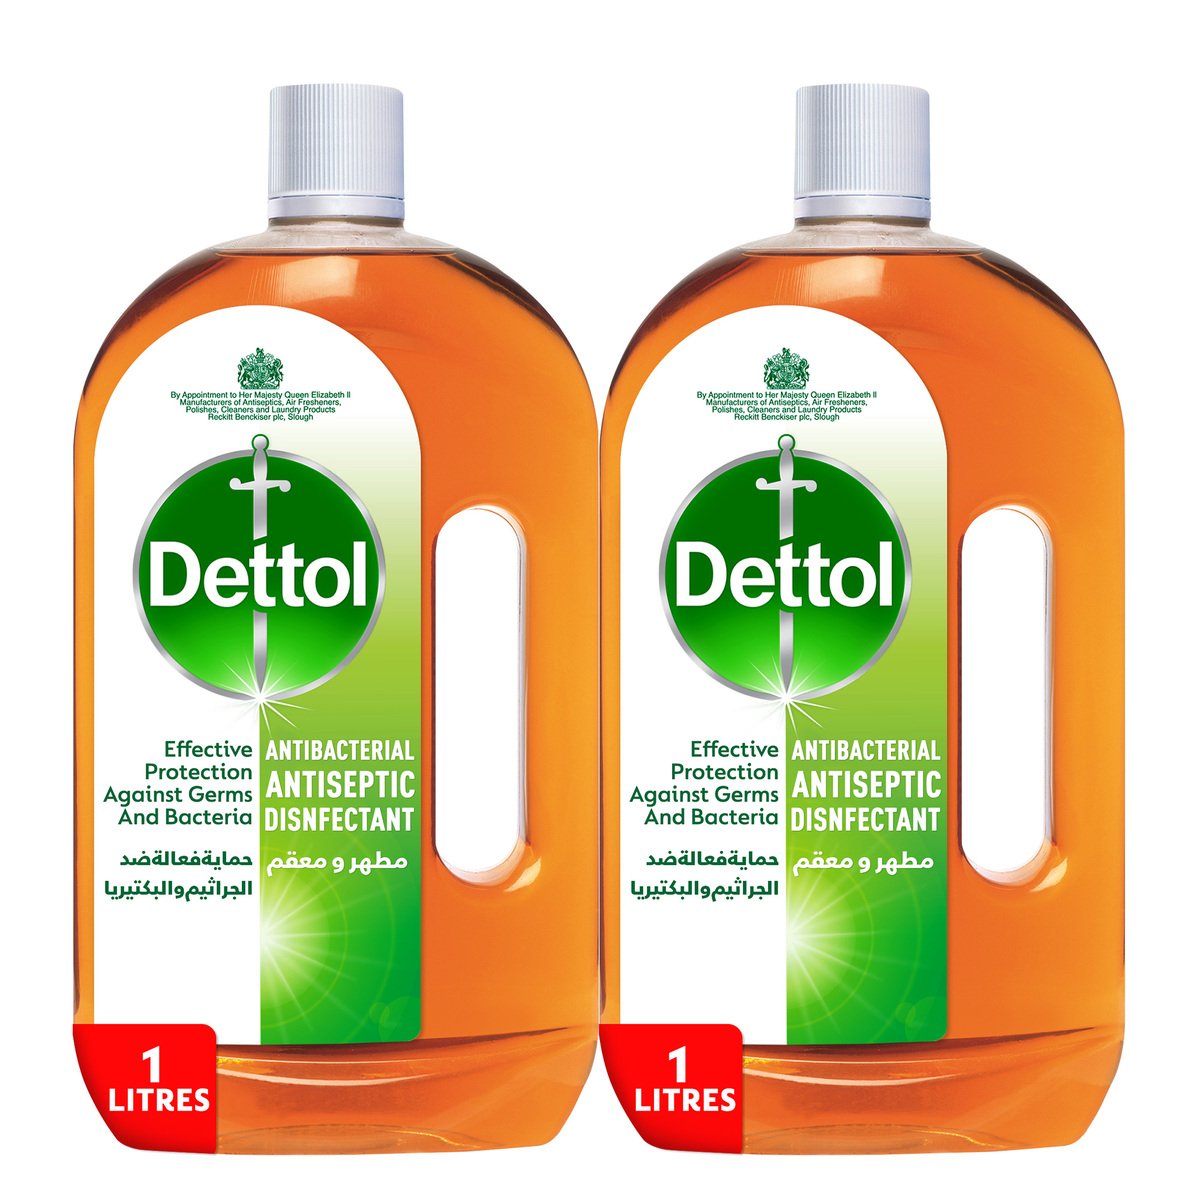 Buy Dettol Antiseptic Disinfectant Value Pack 2 x 1 Litre Online at Best Price | Disinfectants | Lulu Kuwait in Saudi Arabia